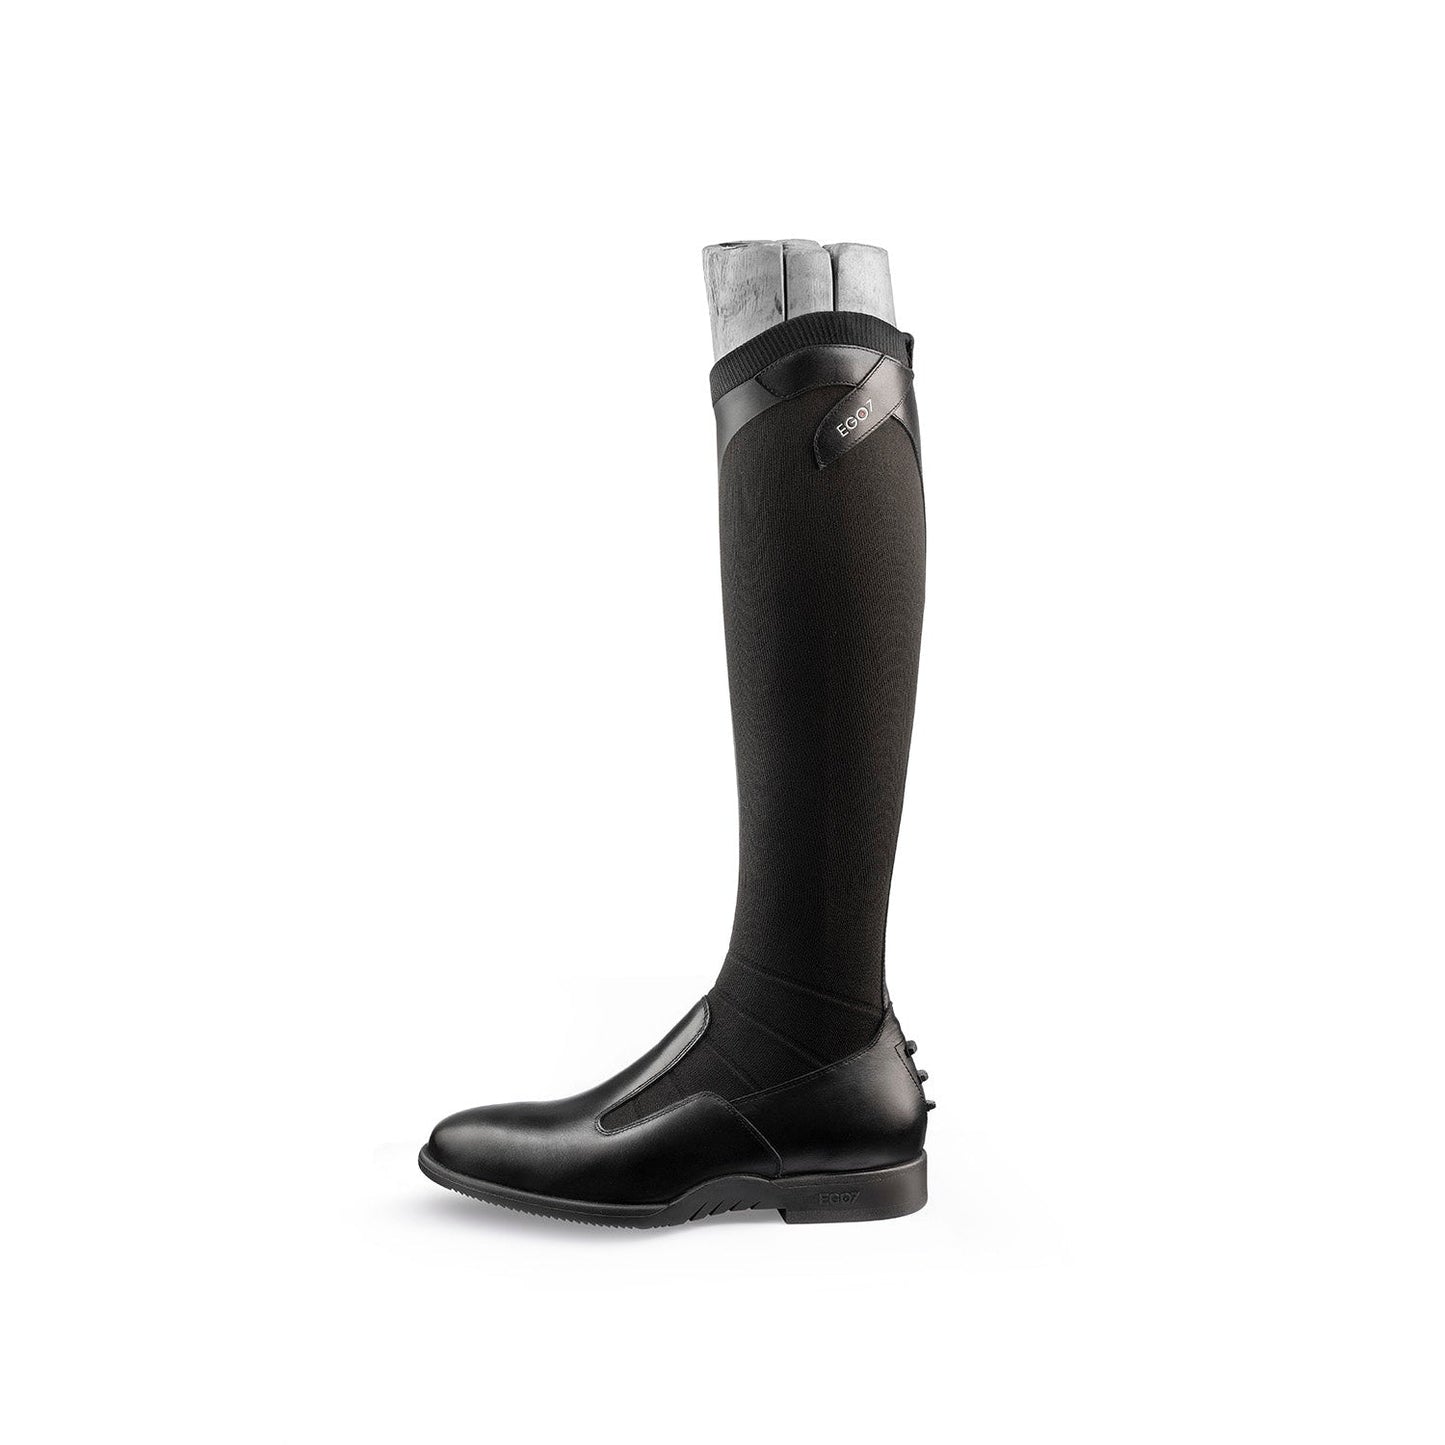 Ego7 Contact Boots-Trailrace Equestrian Outfitters-The Equestrian